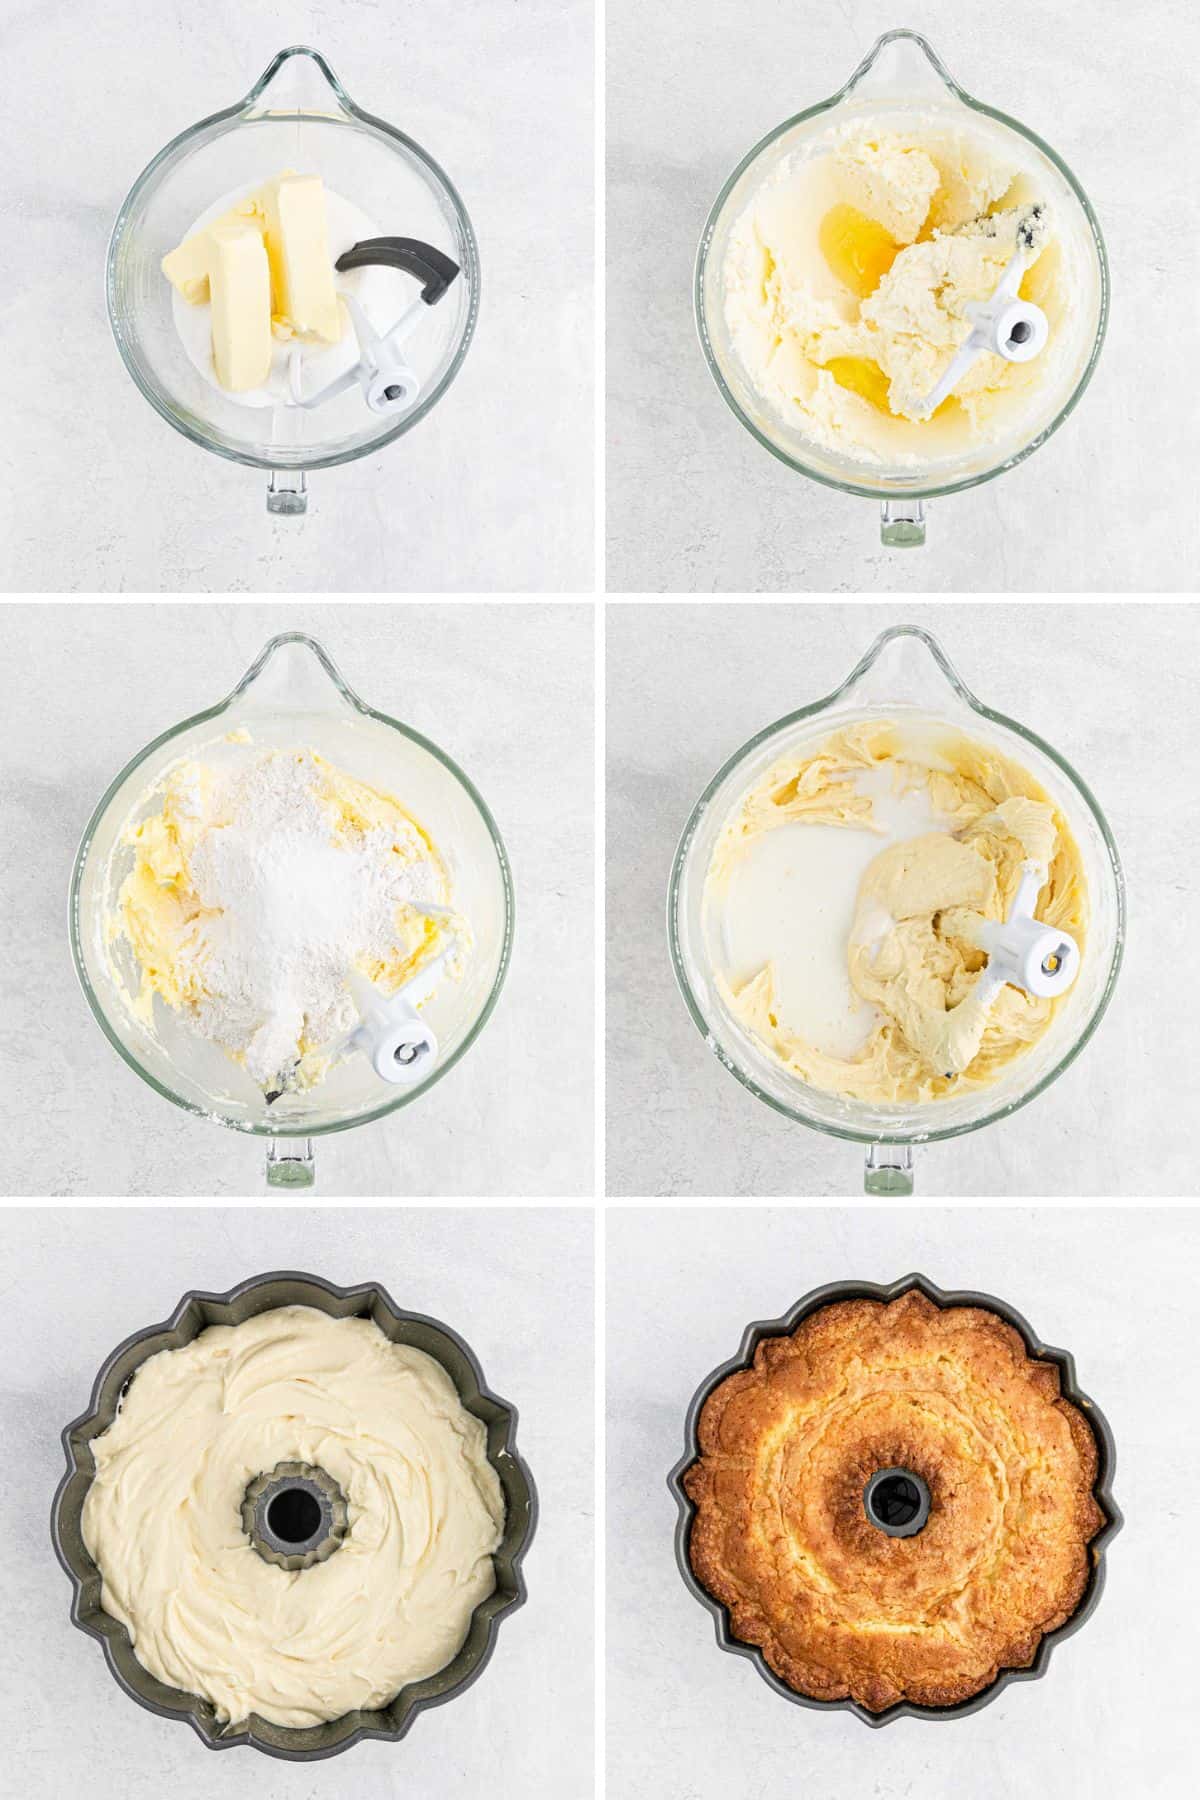 Collage of images showing the steps to make the buttermilk pound cake